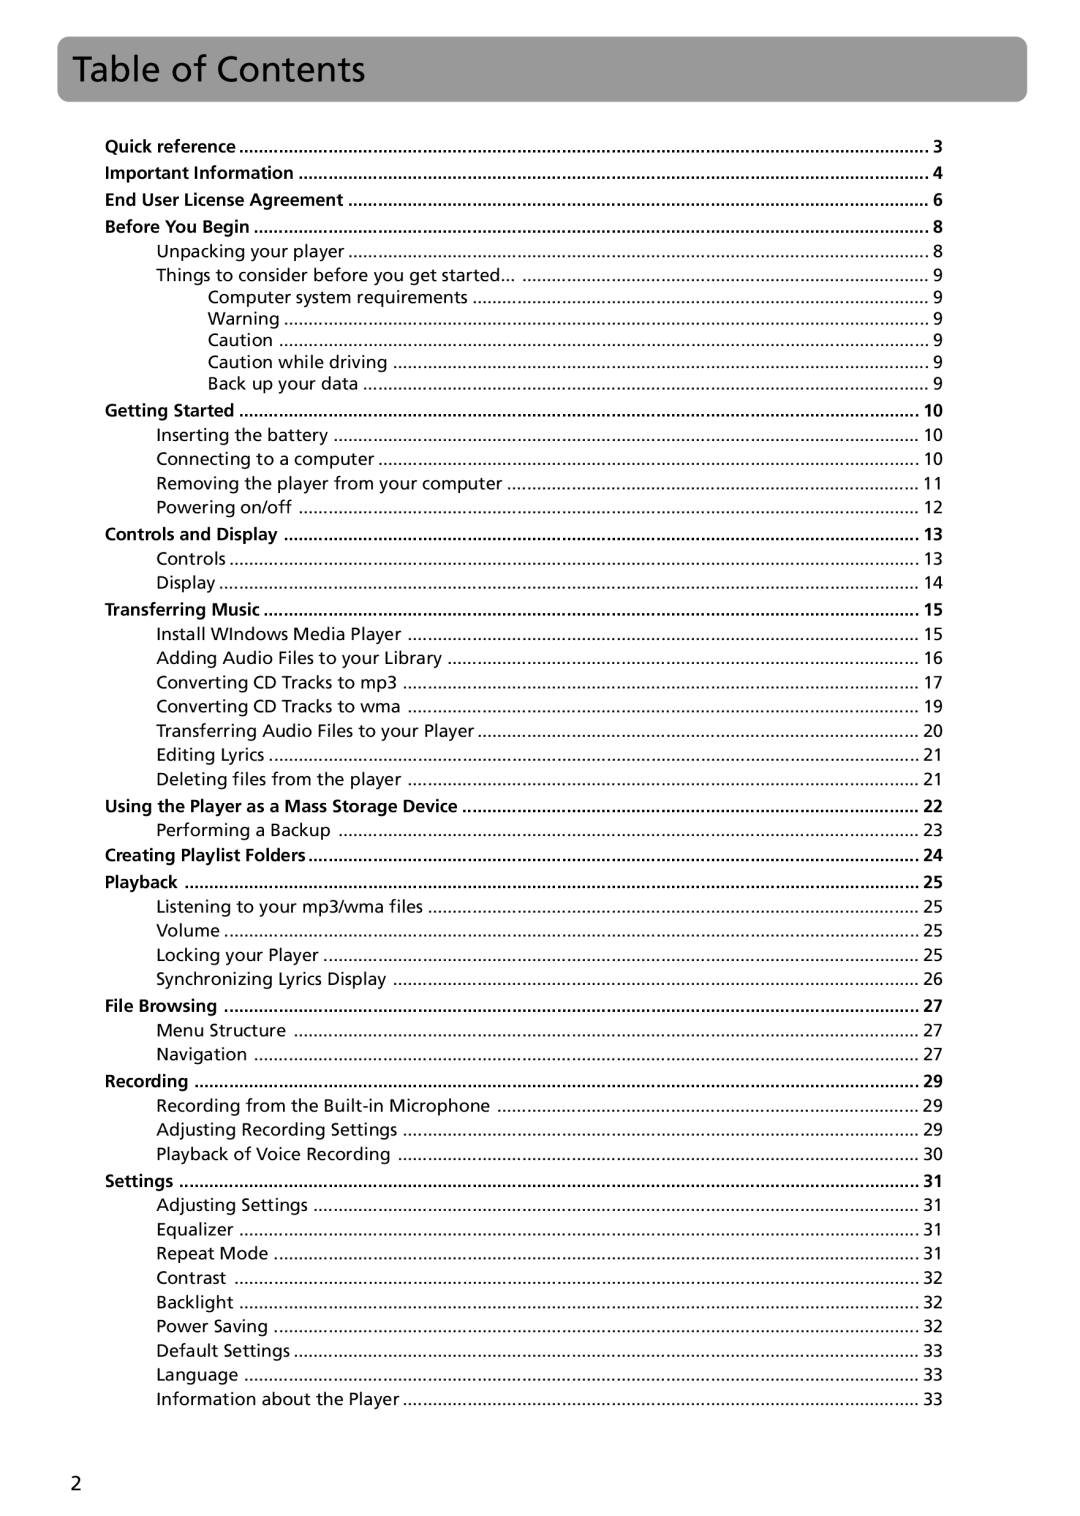 RCA TH1401 user manual Table of Contents, Computer system requirements, Caution while driving, Back up your data 